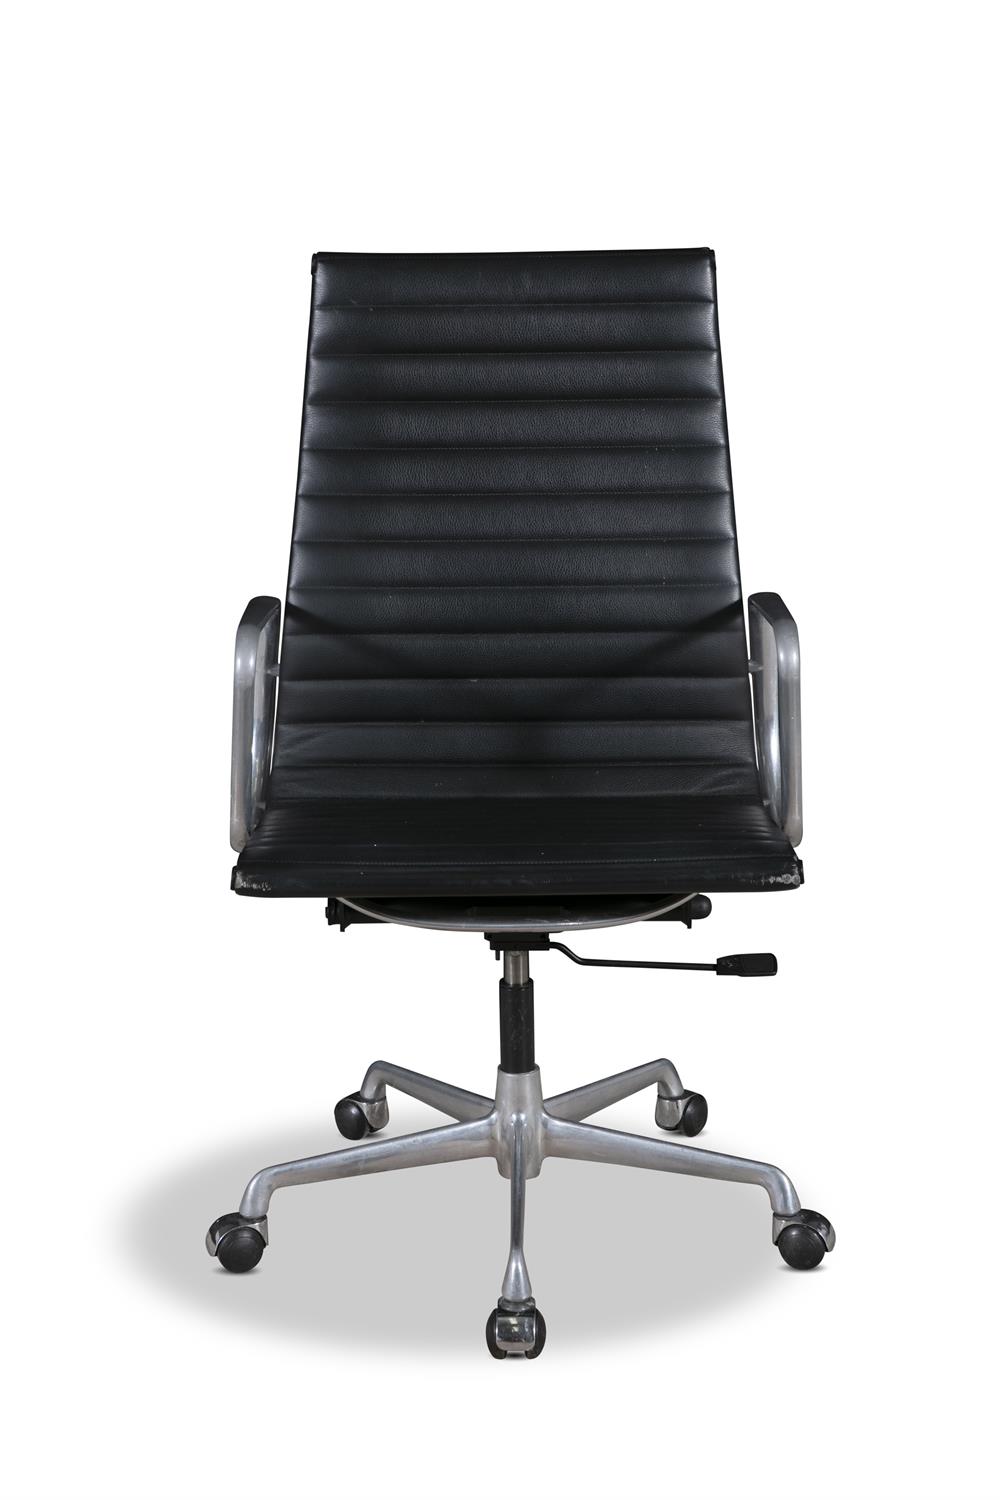 EAMES EA119 chair by Eames, produced by ICF, with maker's label. 59 x 60 x 102.5cm(h) - Image 2 of 6